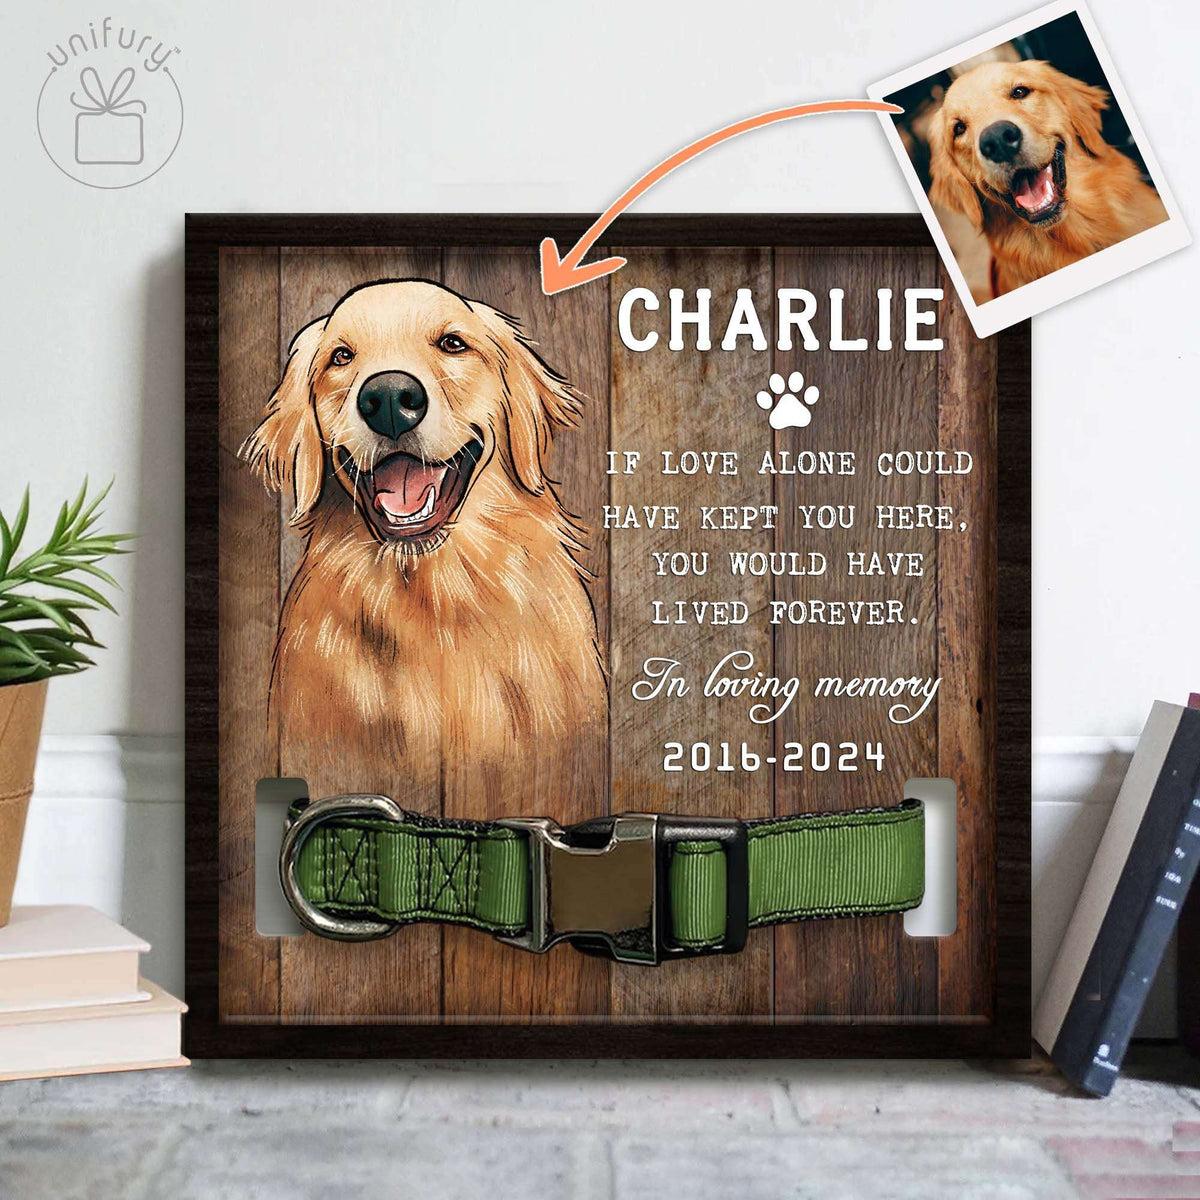 You Would Have Lived Forever Hand-drawn Portrait Pet Collar Frame